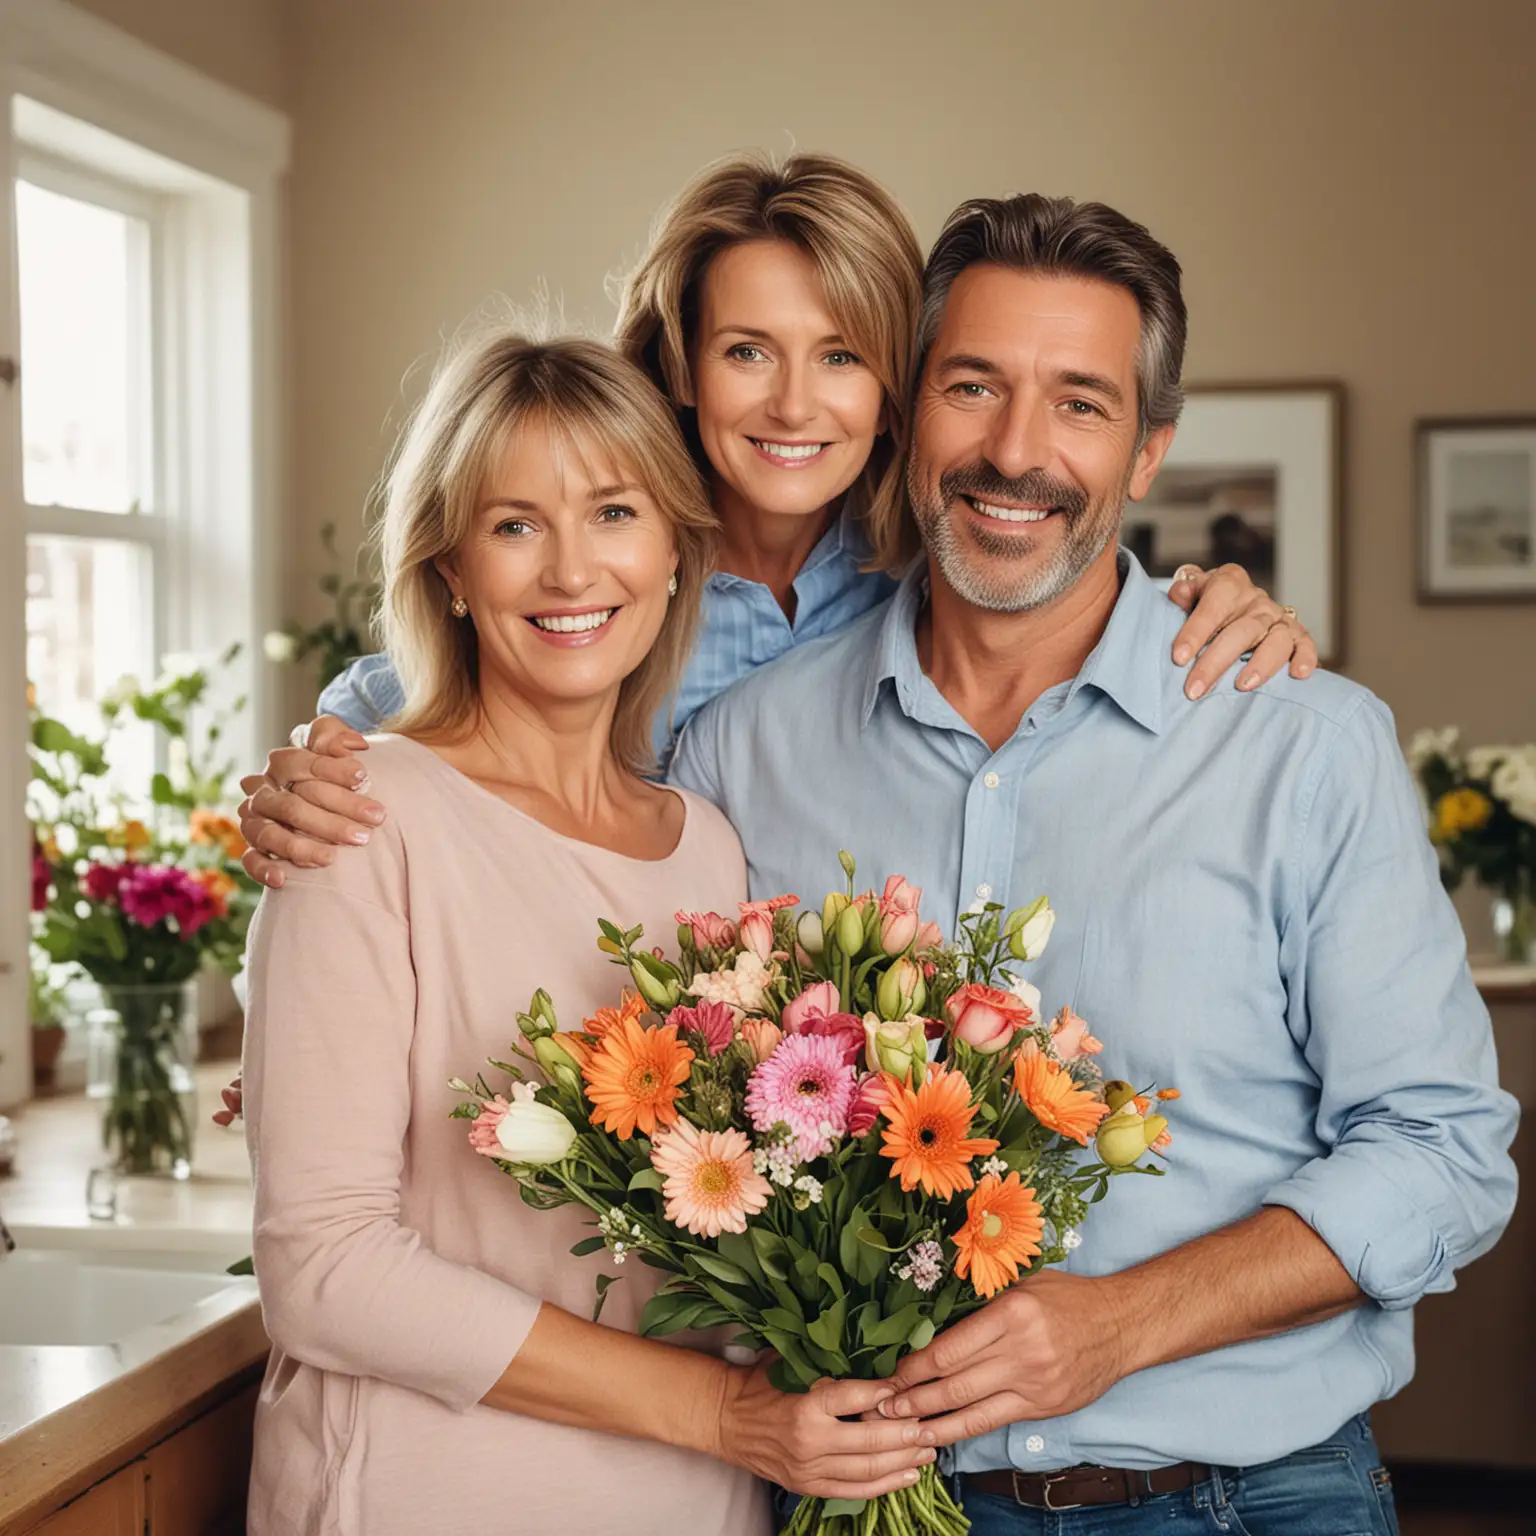 Midlife Happy Family Home Scene with Bouquet of Flowers